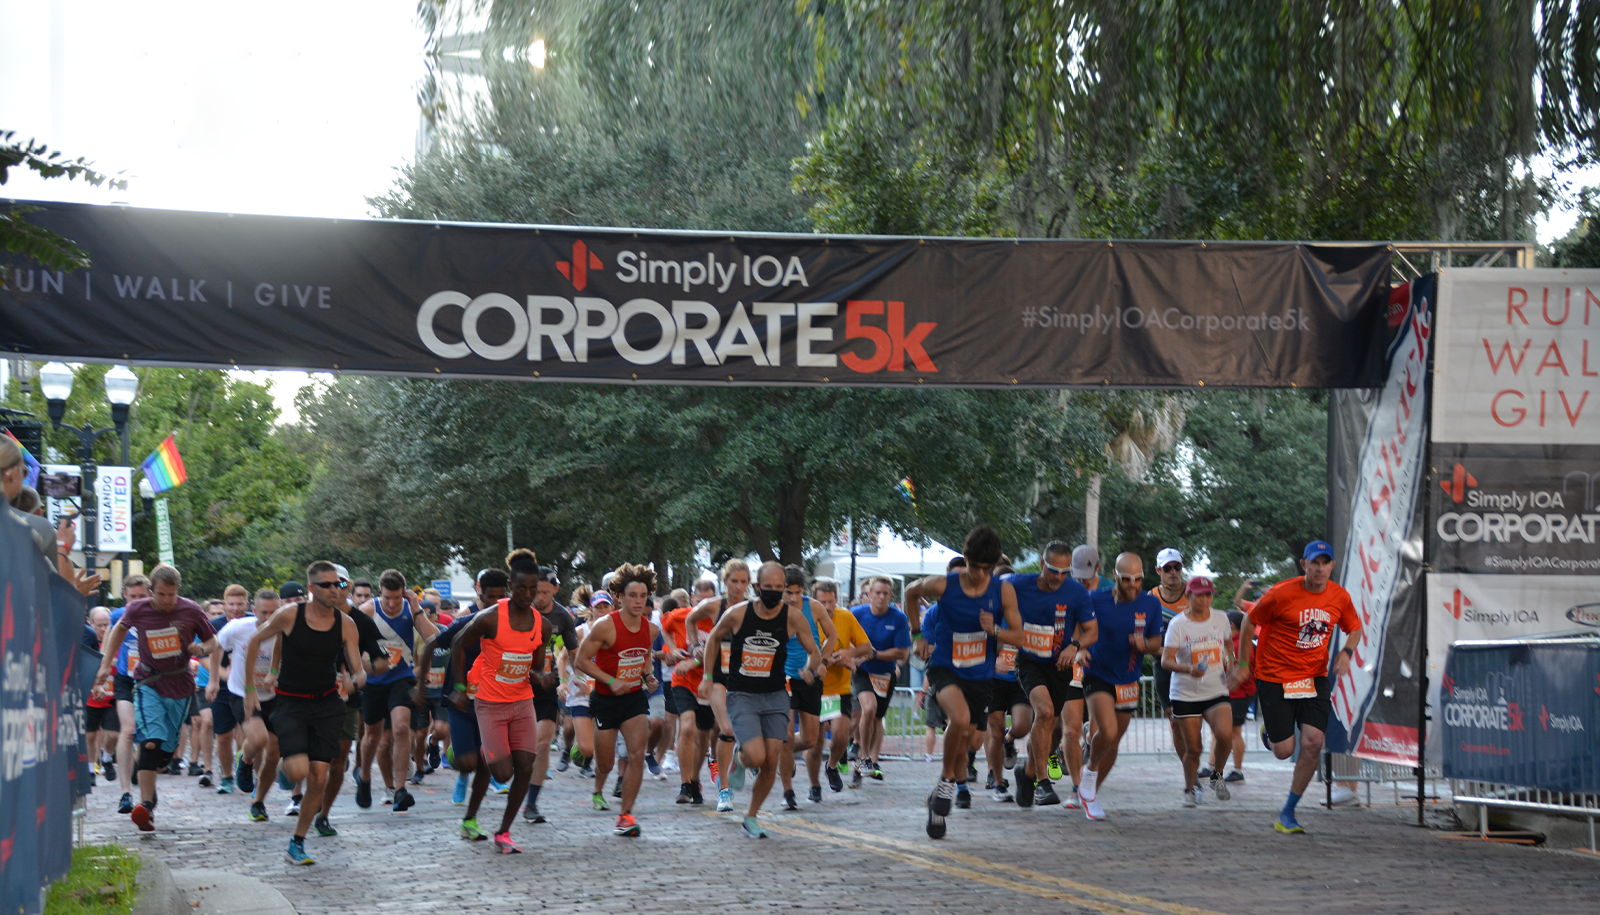 5 Facts You Should Know About the SimplyIOA Corporate 5K